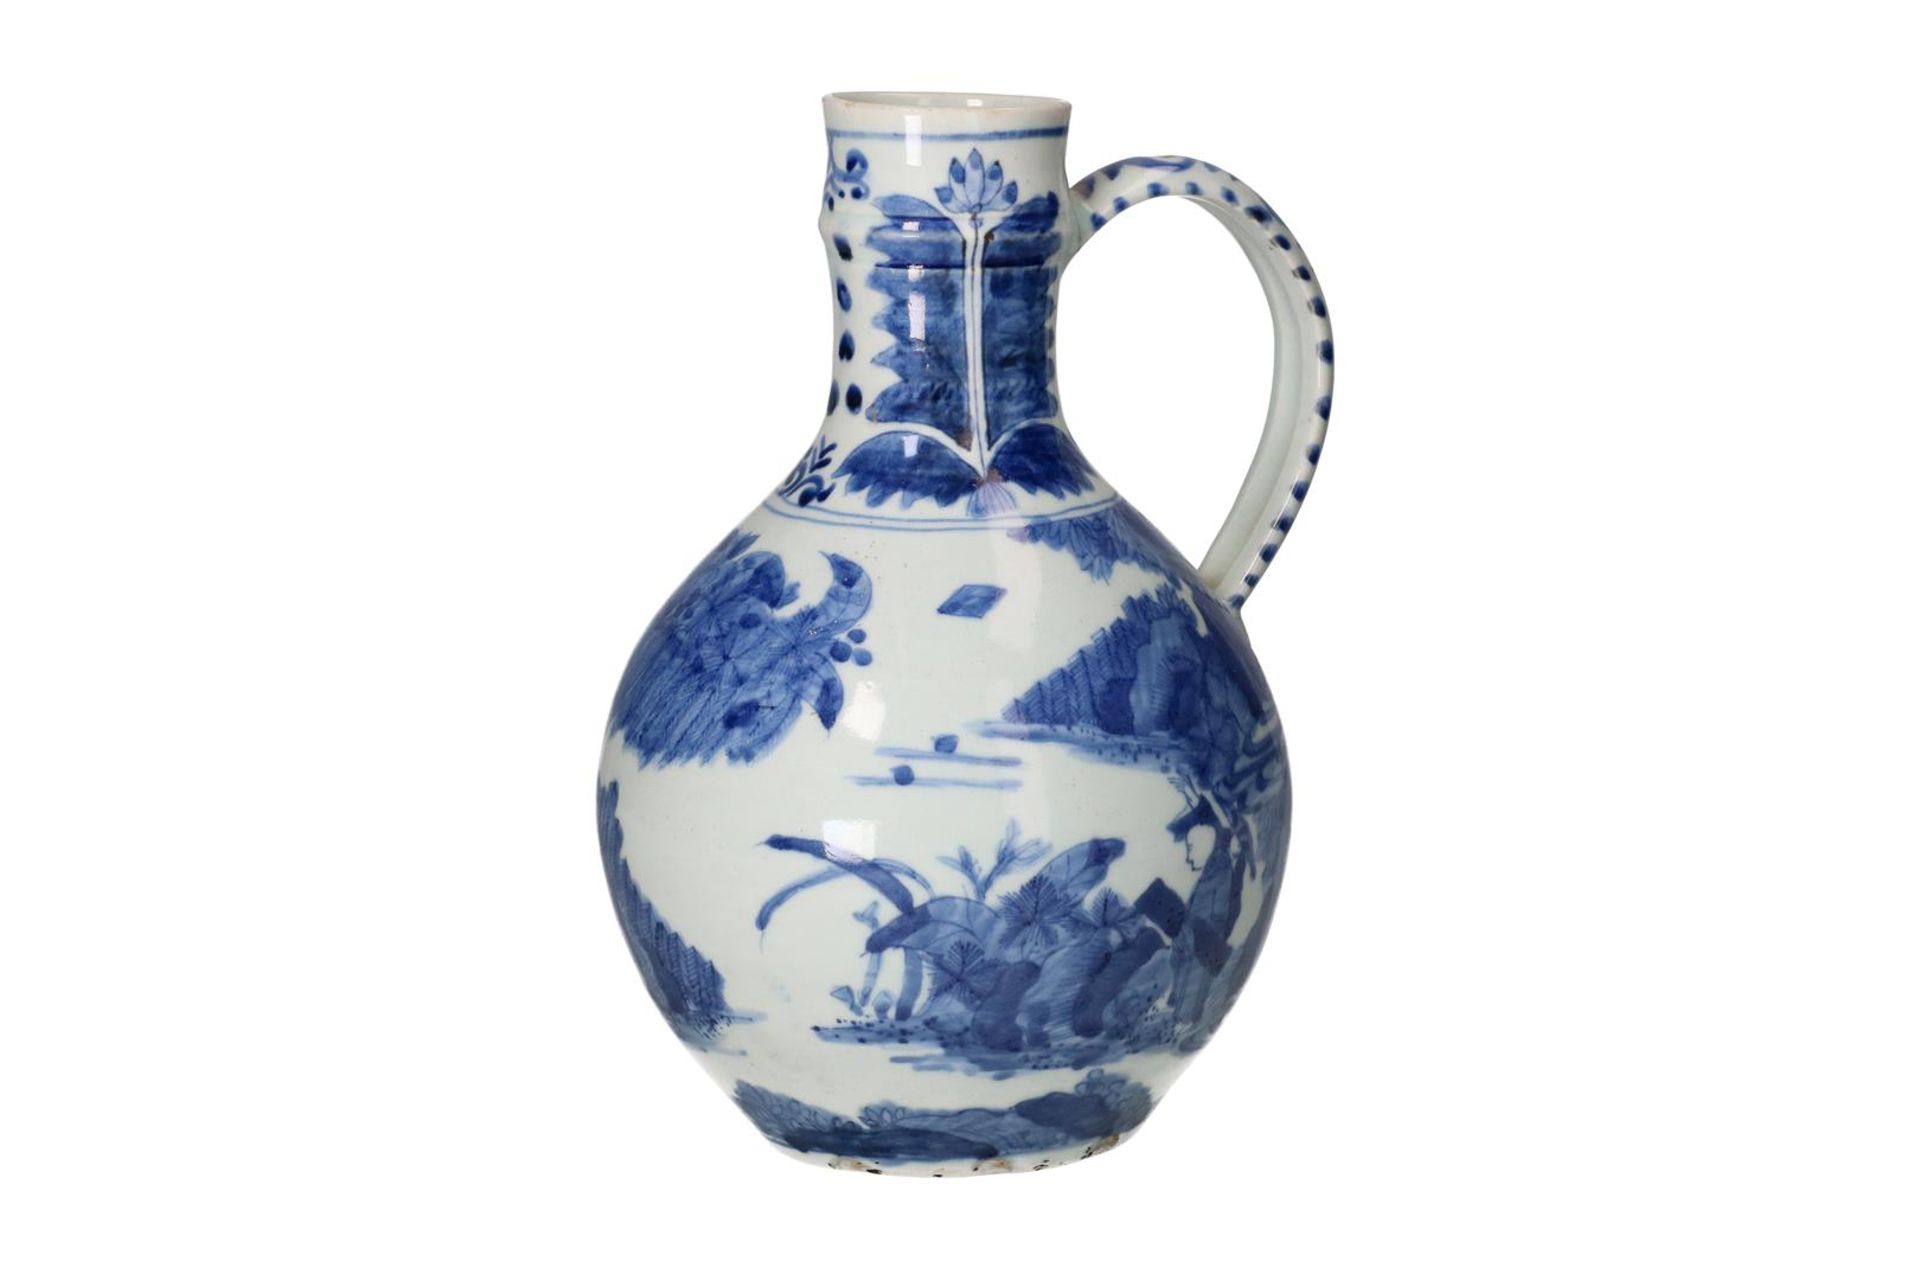 A pair of blue and white porcelain jugs with handle, decorated with figures on the waterfront. - Image 8 of 11